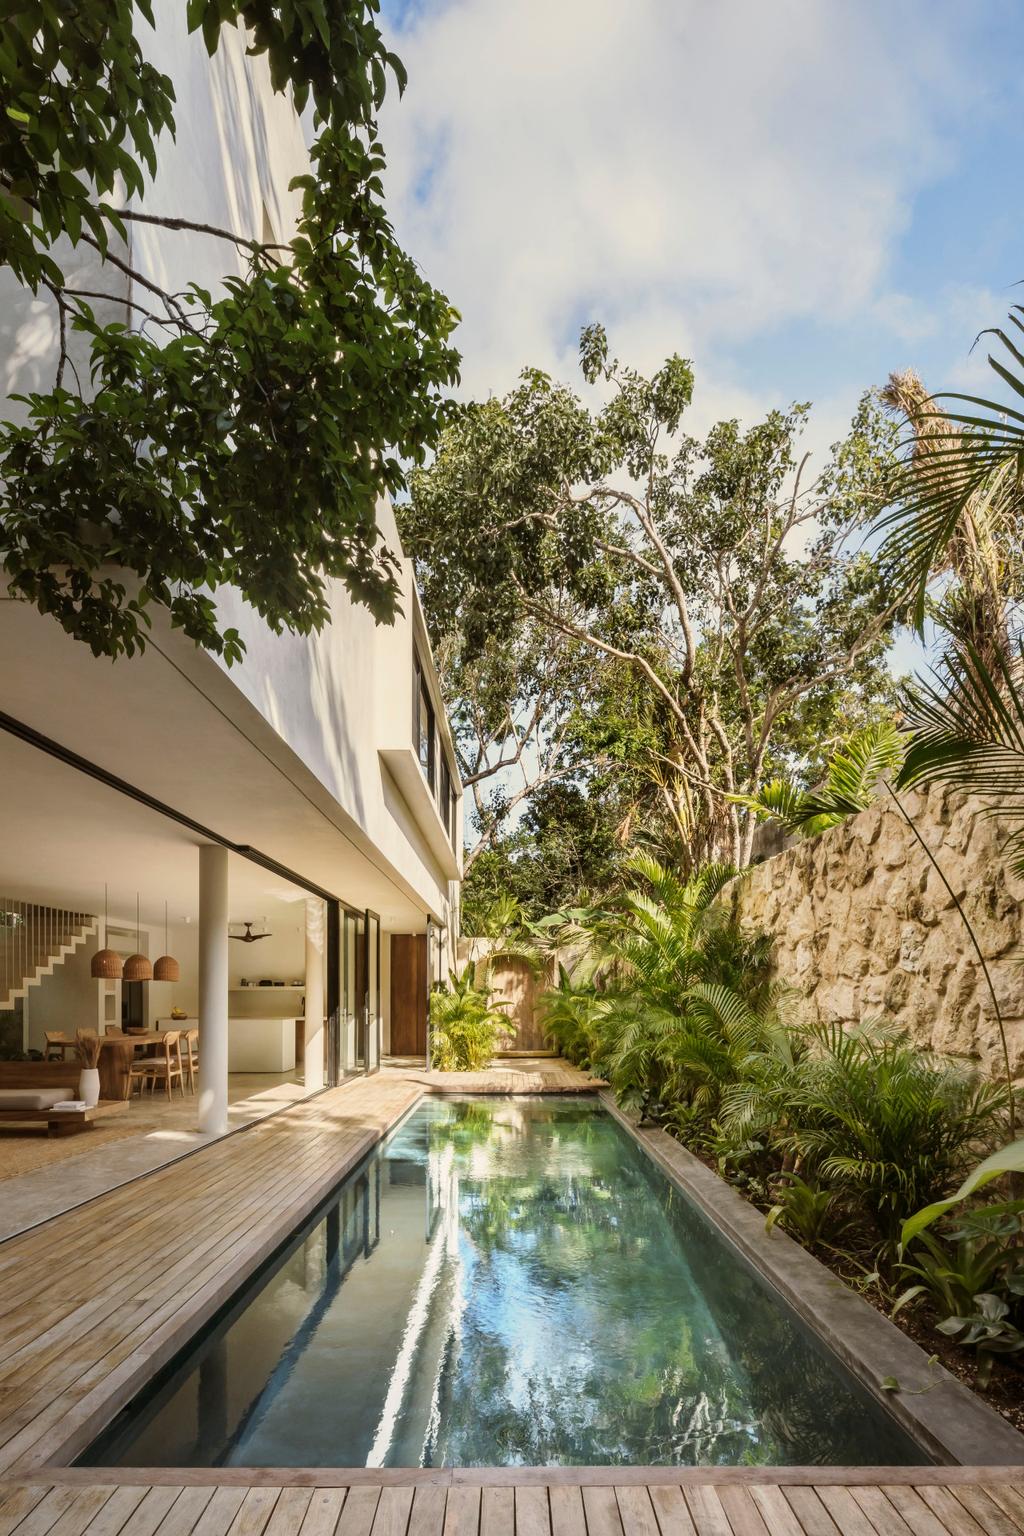 A tropical holiday home in the trendy Mexican beach town of Tulum